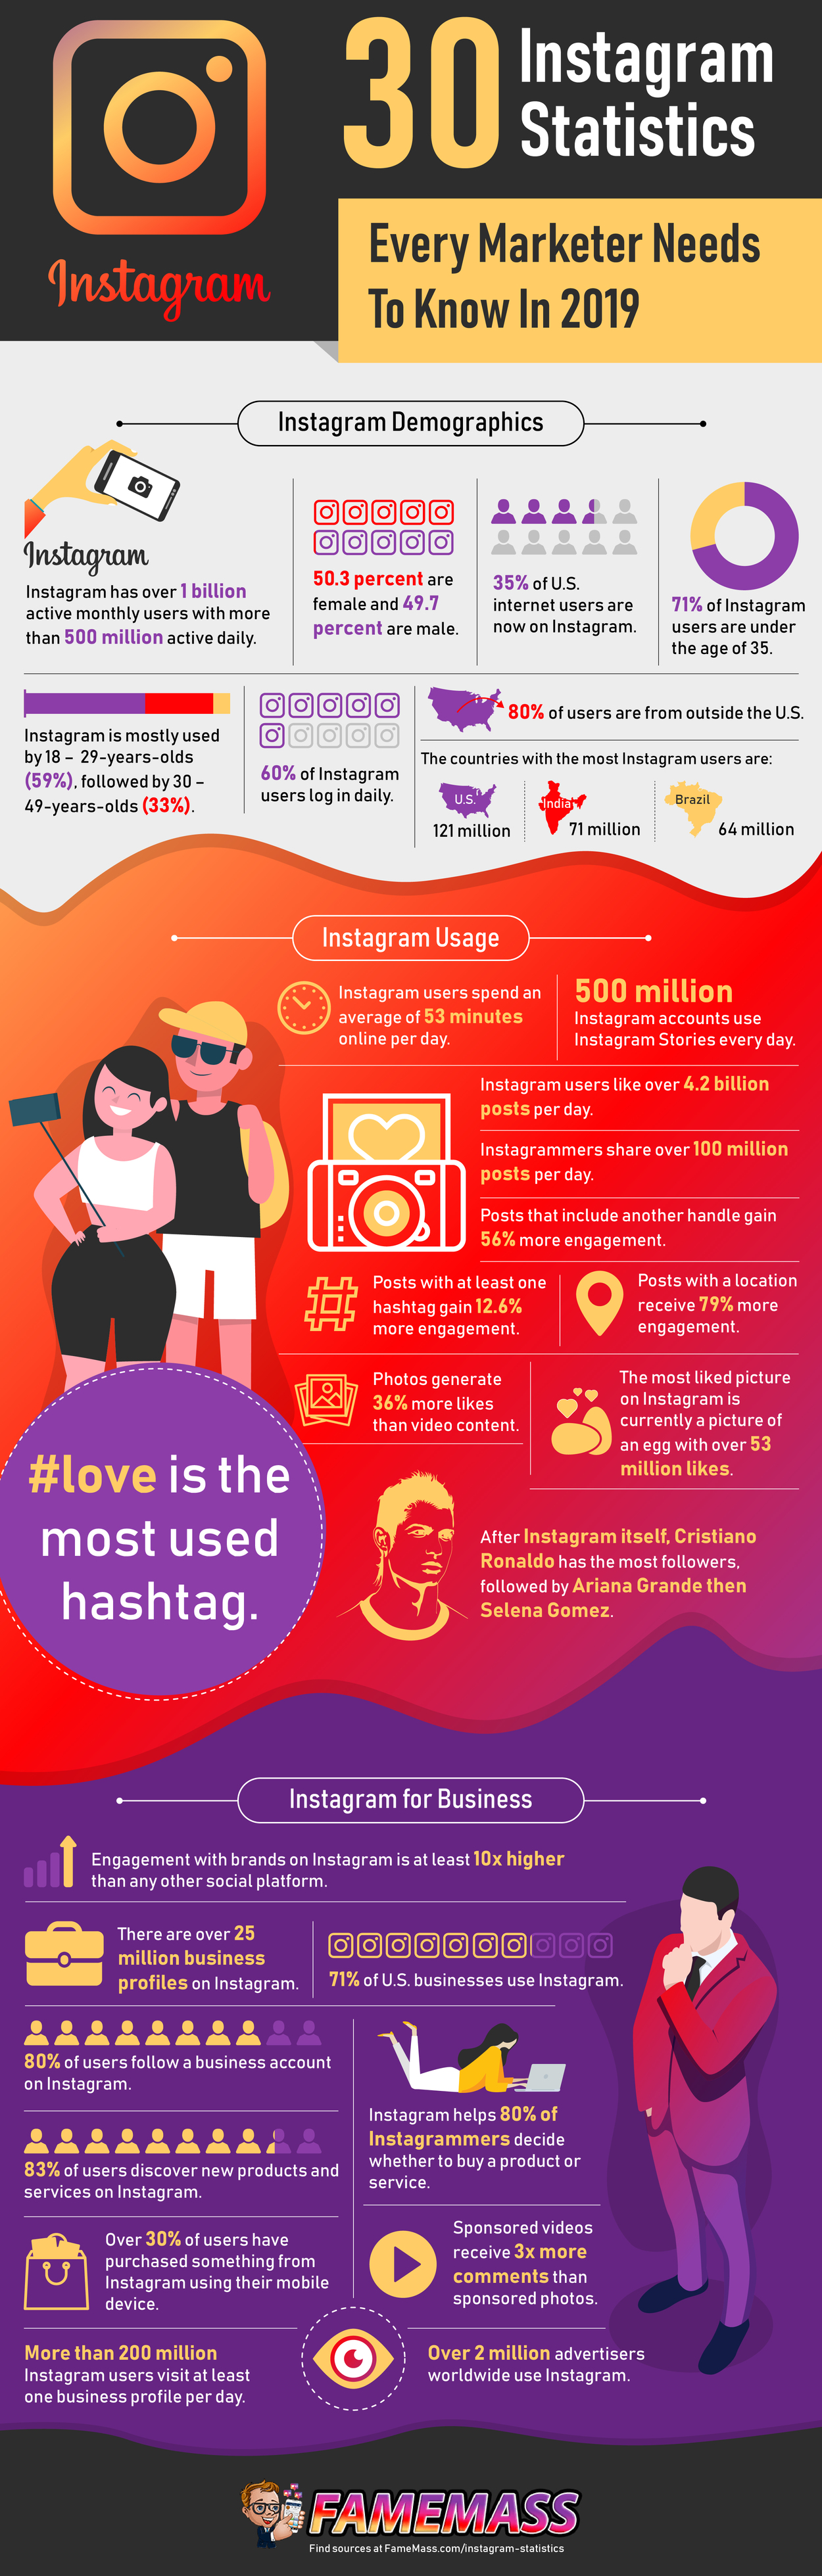 30 Instagram Statistics - Every Marketer Needs To Know in 2019